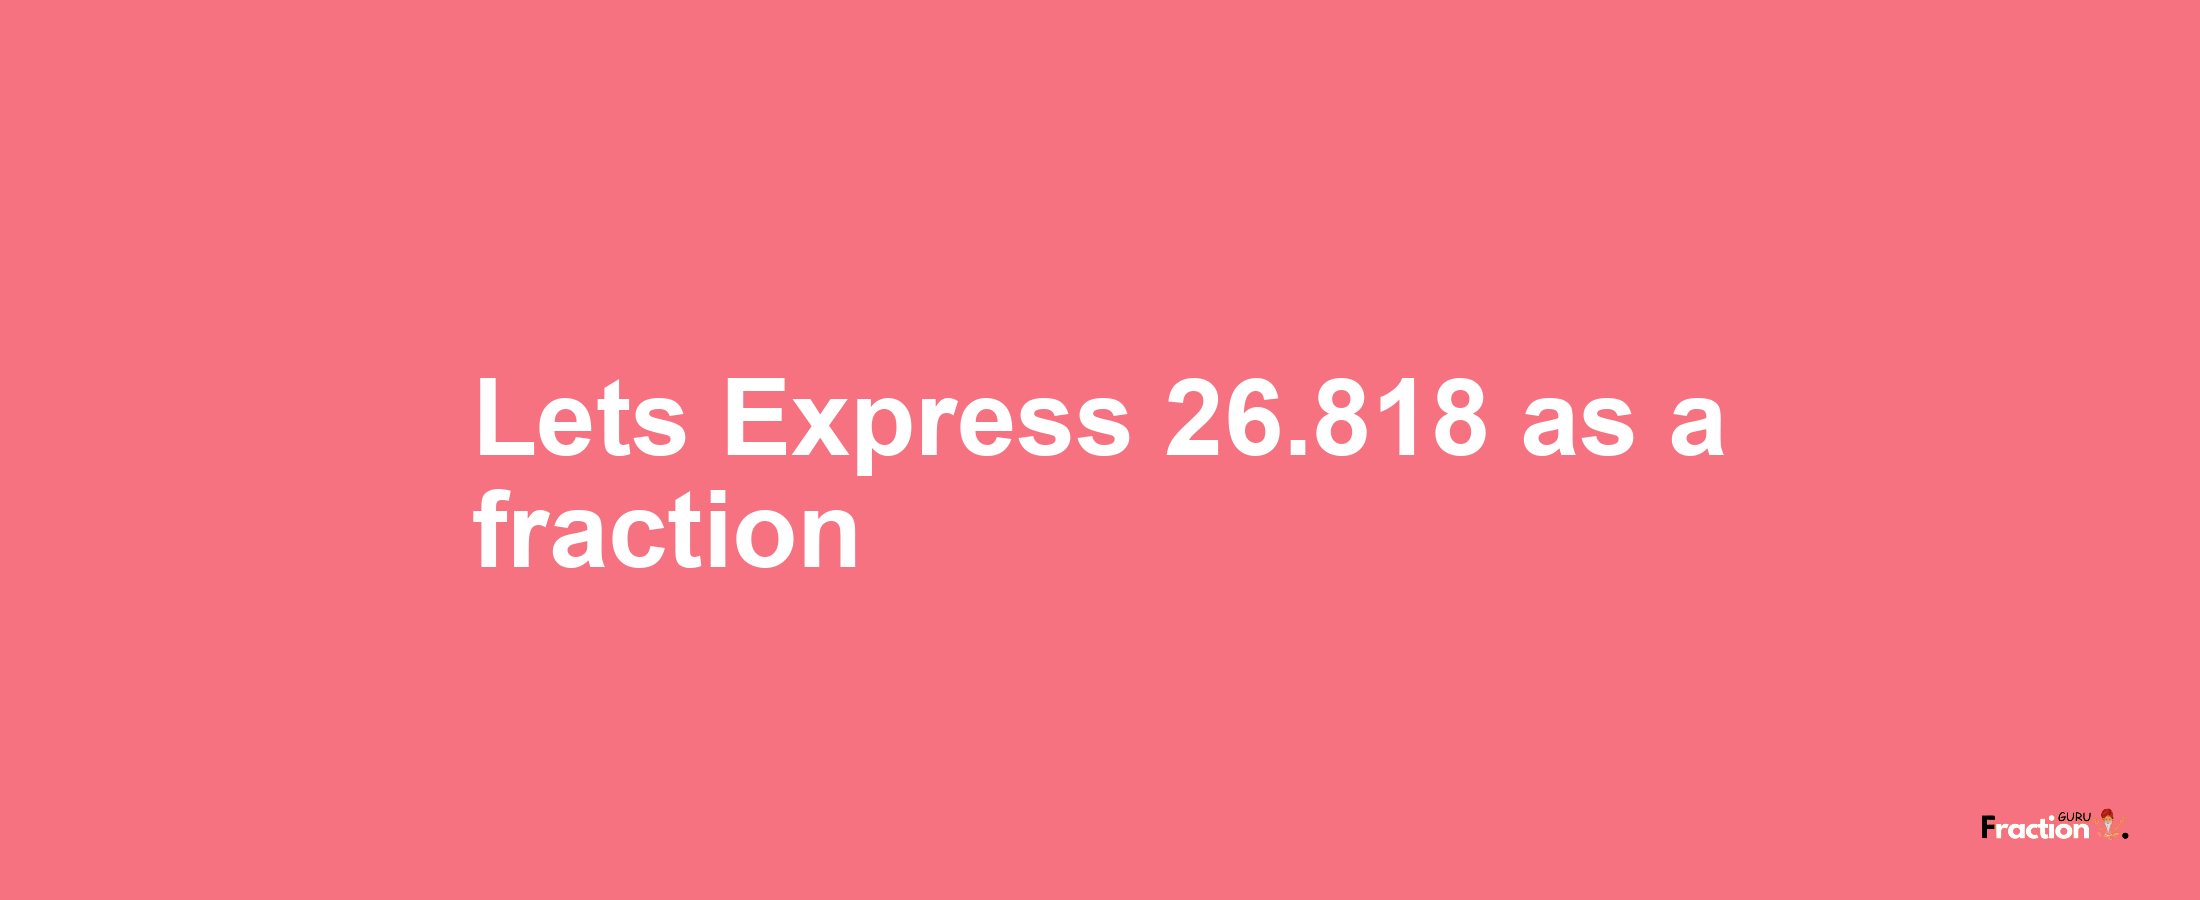 Lets Express 26.818 as afraction